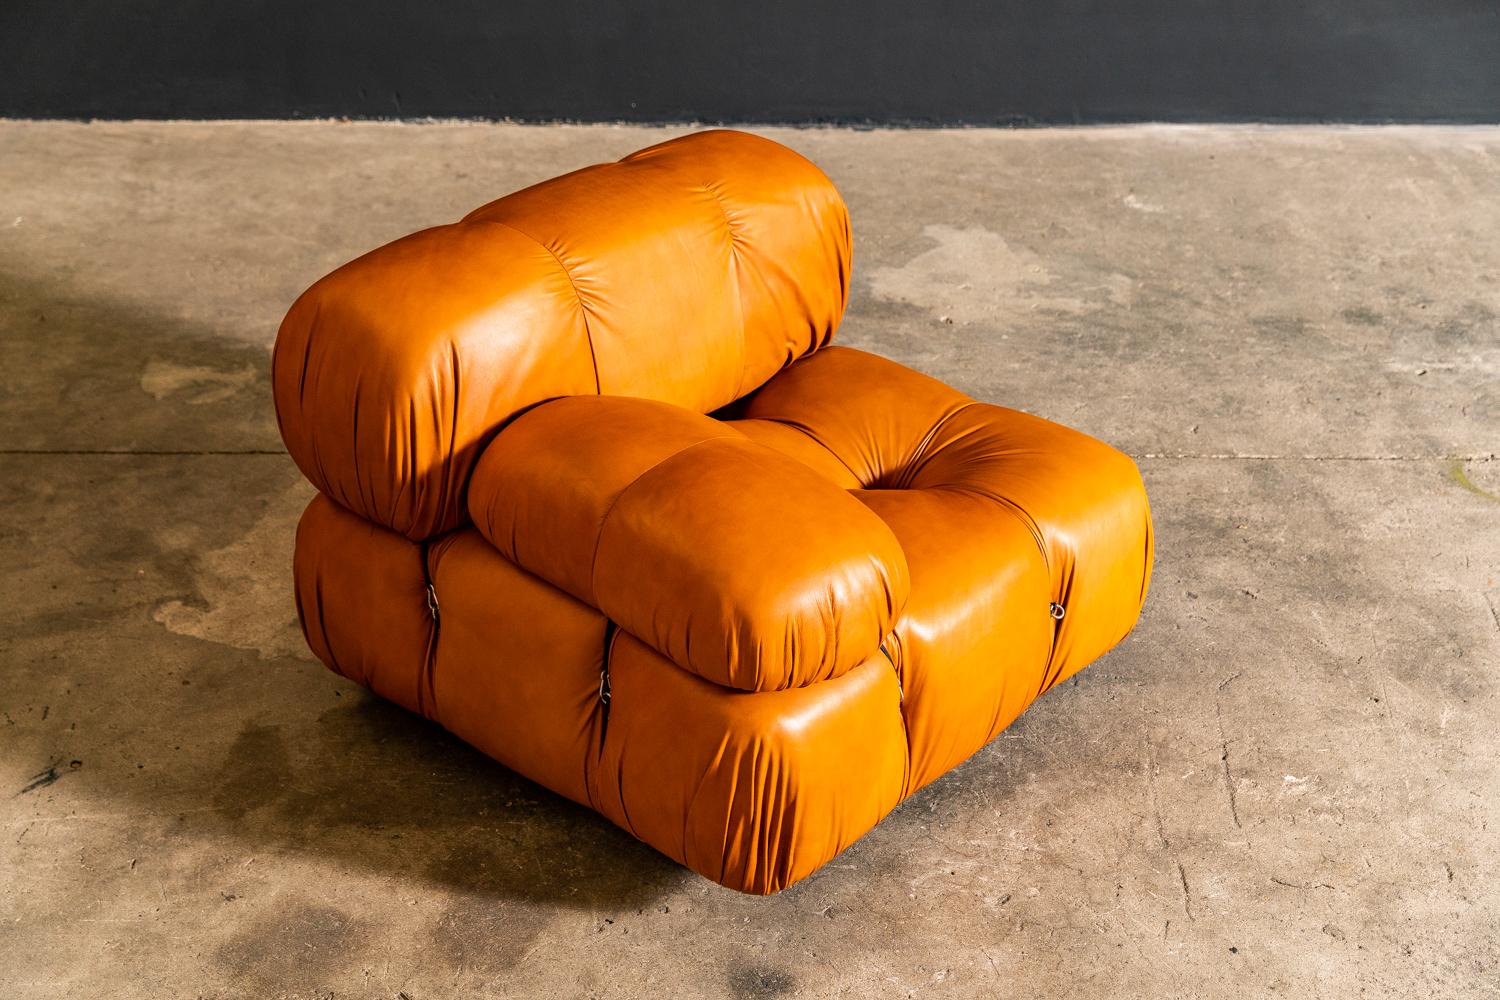 The Camaleonda modular sofa was designed by Italian architect Mario Bellini in 1971.This all original example has four sections. Two single armchairs with 2 accompanying centre chairs. The entire suite retains its original patinated tan leather and